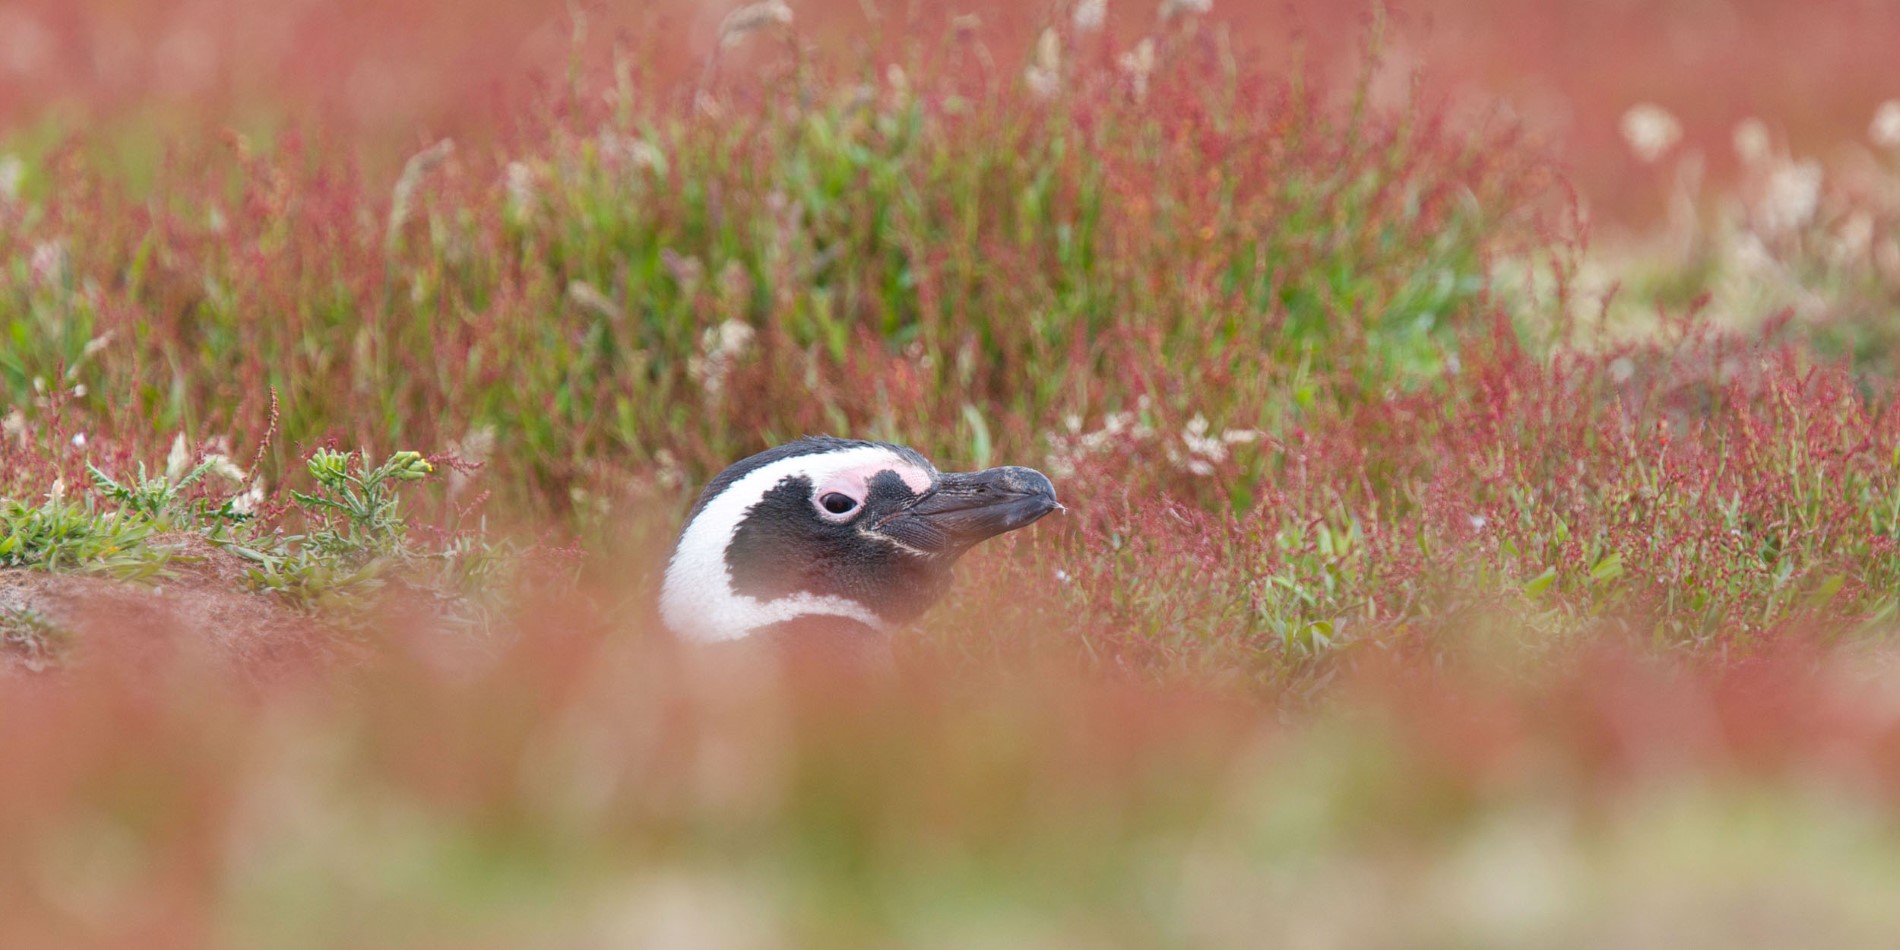 Maybe you will spot a Magellanic Penguin